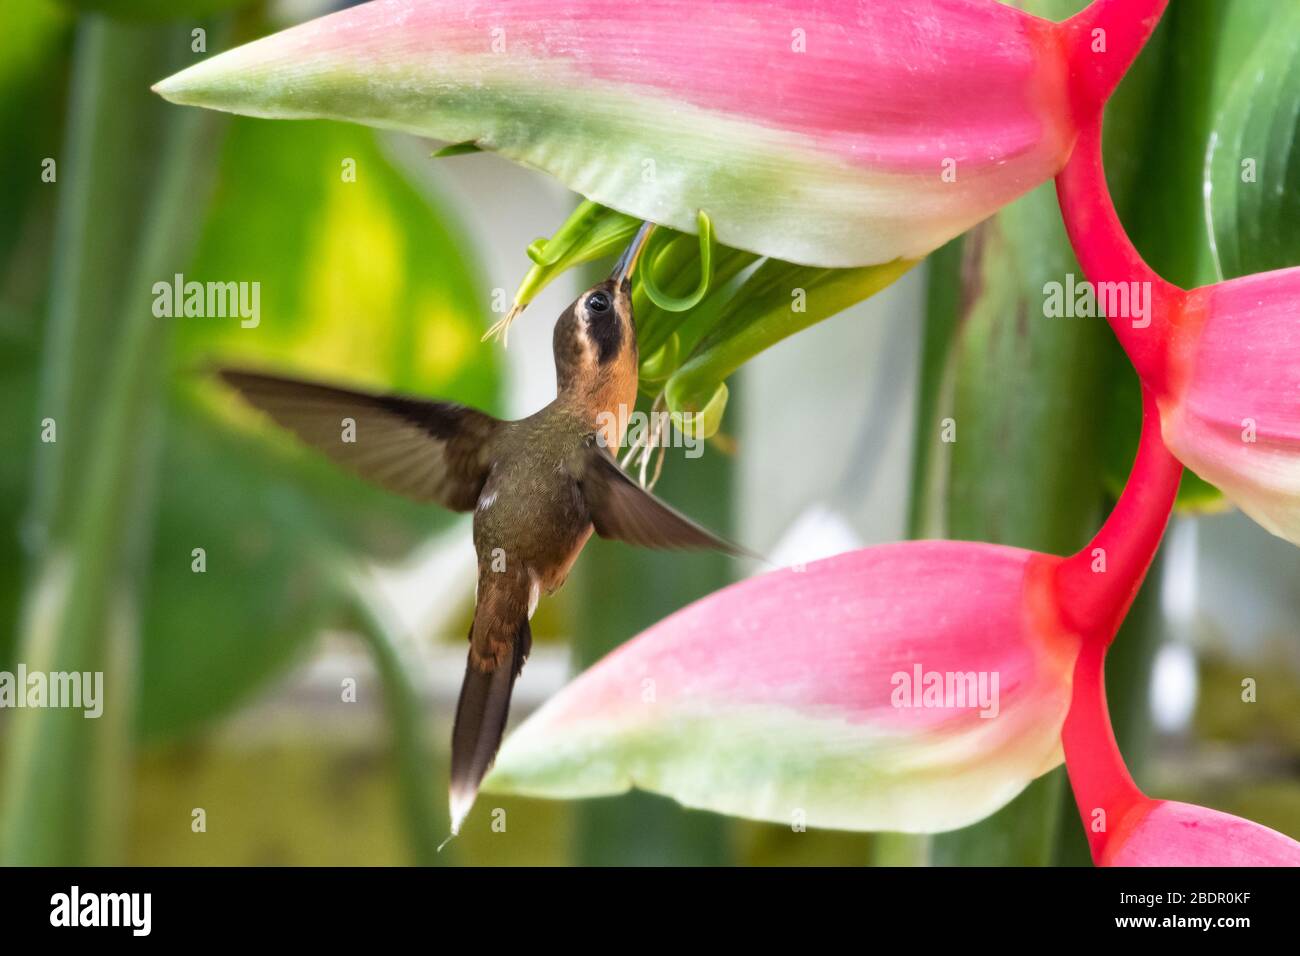 A Little Hermit hummingbird feeding on the Flamingo Pink Heliconia flower. Stock Photo